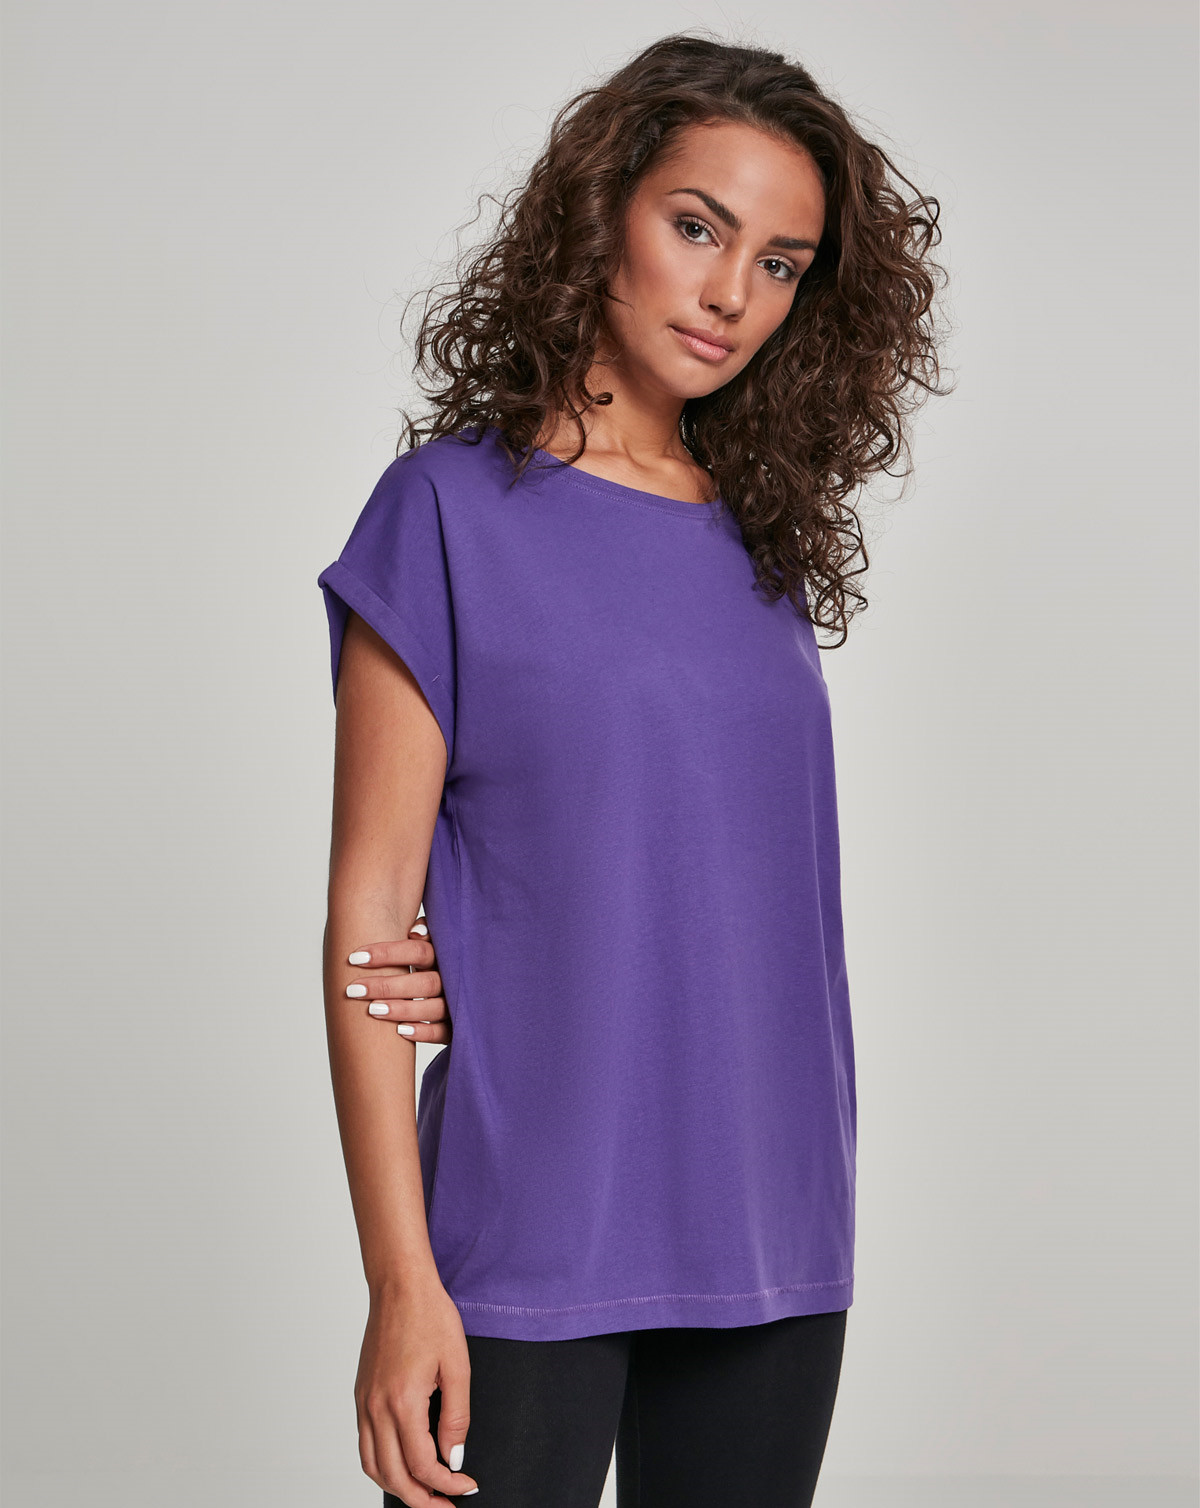 Urban Classics Ladies Extended Shoulder Tee (Ultra Violet, S)